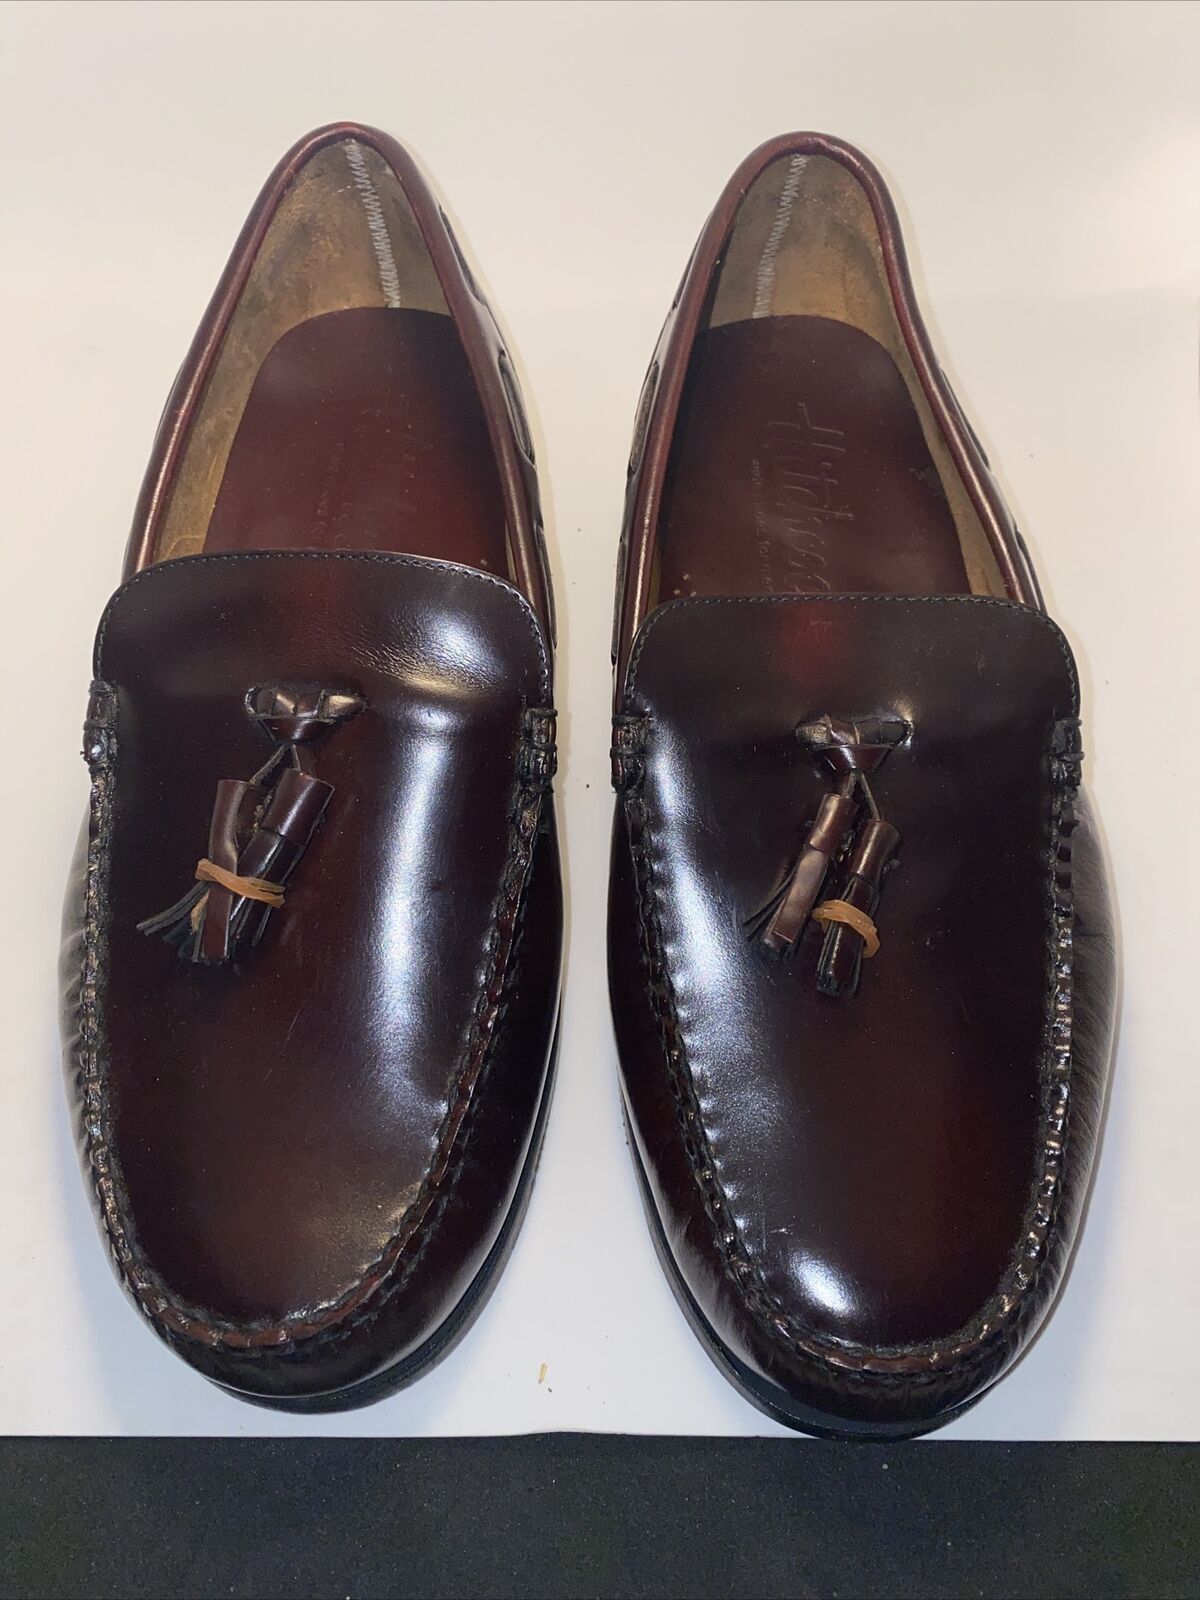 Hitchcock Kiltie Tassel Loafers Dress Shoes size 9 1/2. 6D. Mens red leather NWB